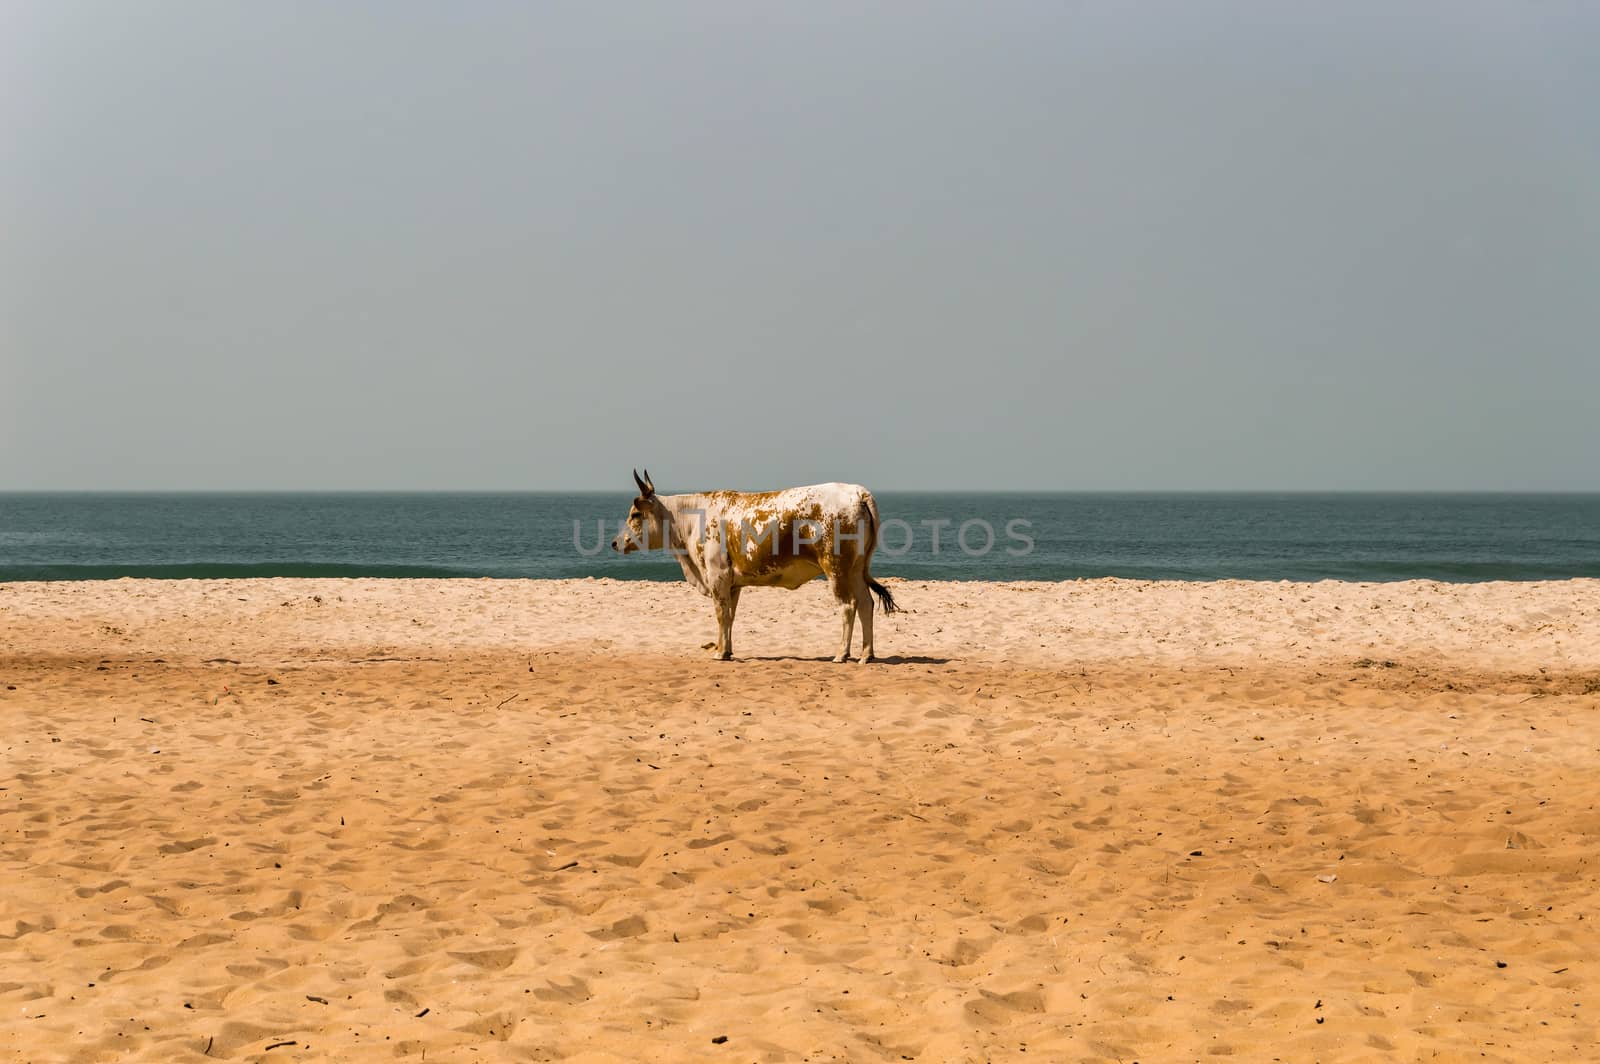 Bull on the beach in the town of Bijilo  by Philou1000